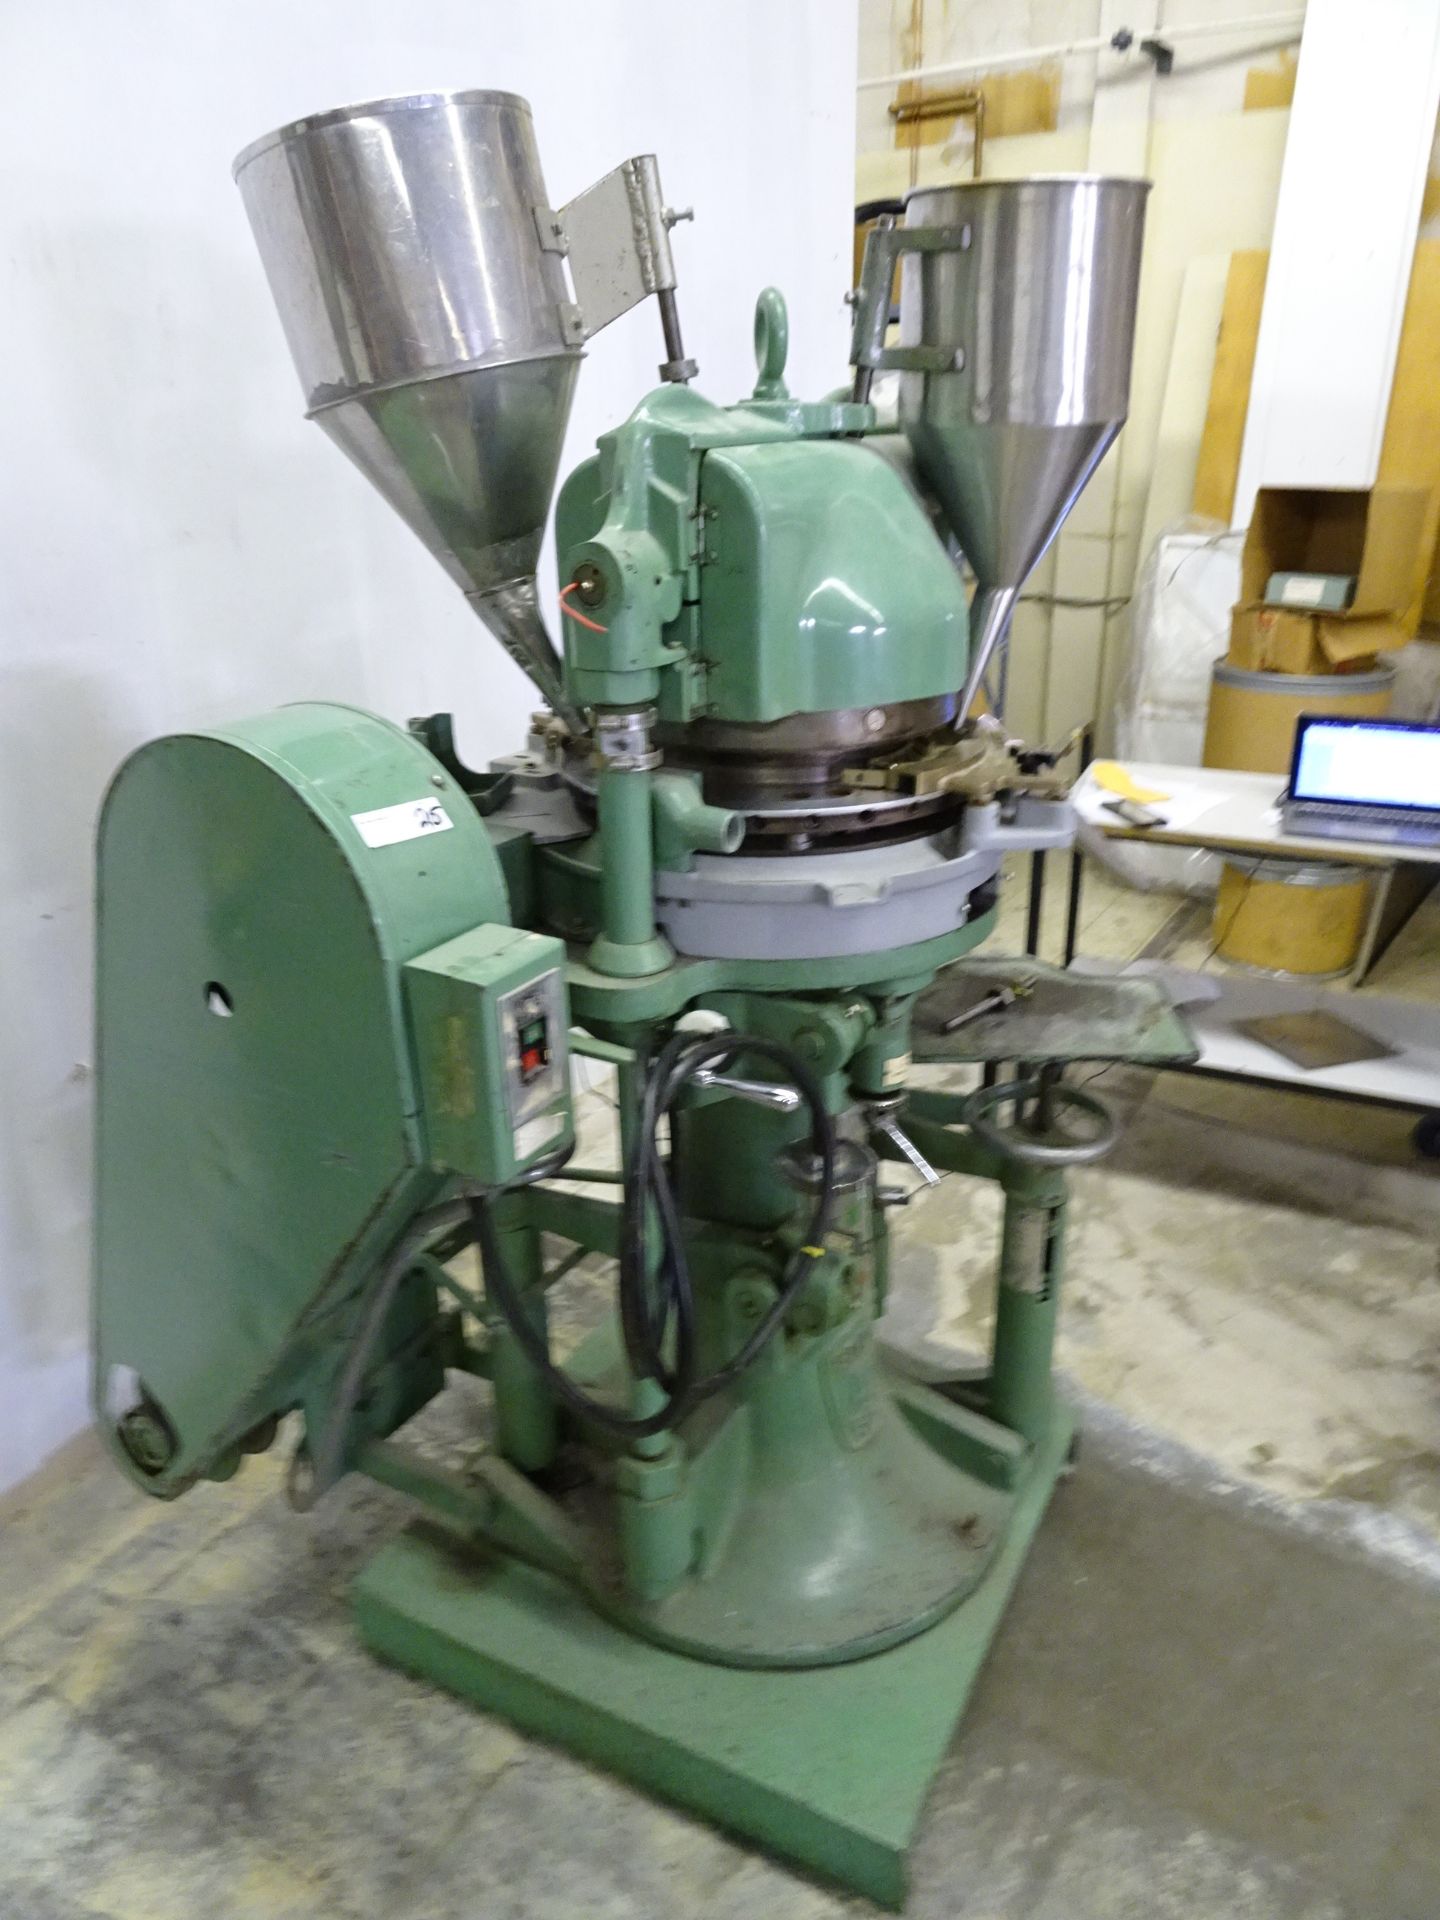 F.J. Stokes BB2 Tablet Press, Model 313-1 s/n T42054 1.5 Ton 24 Station Turret, (2) Feed Stations - Image 4 of 9